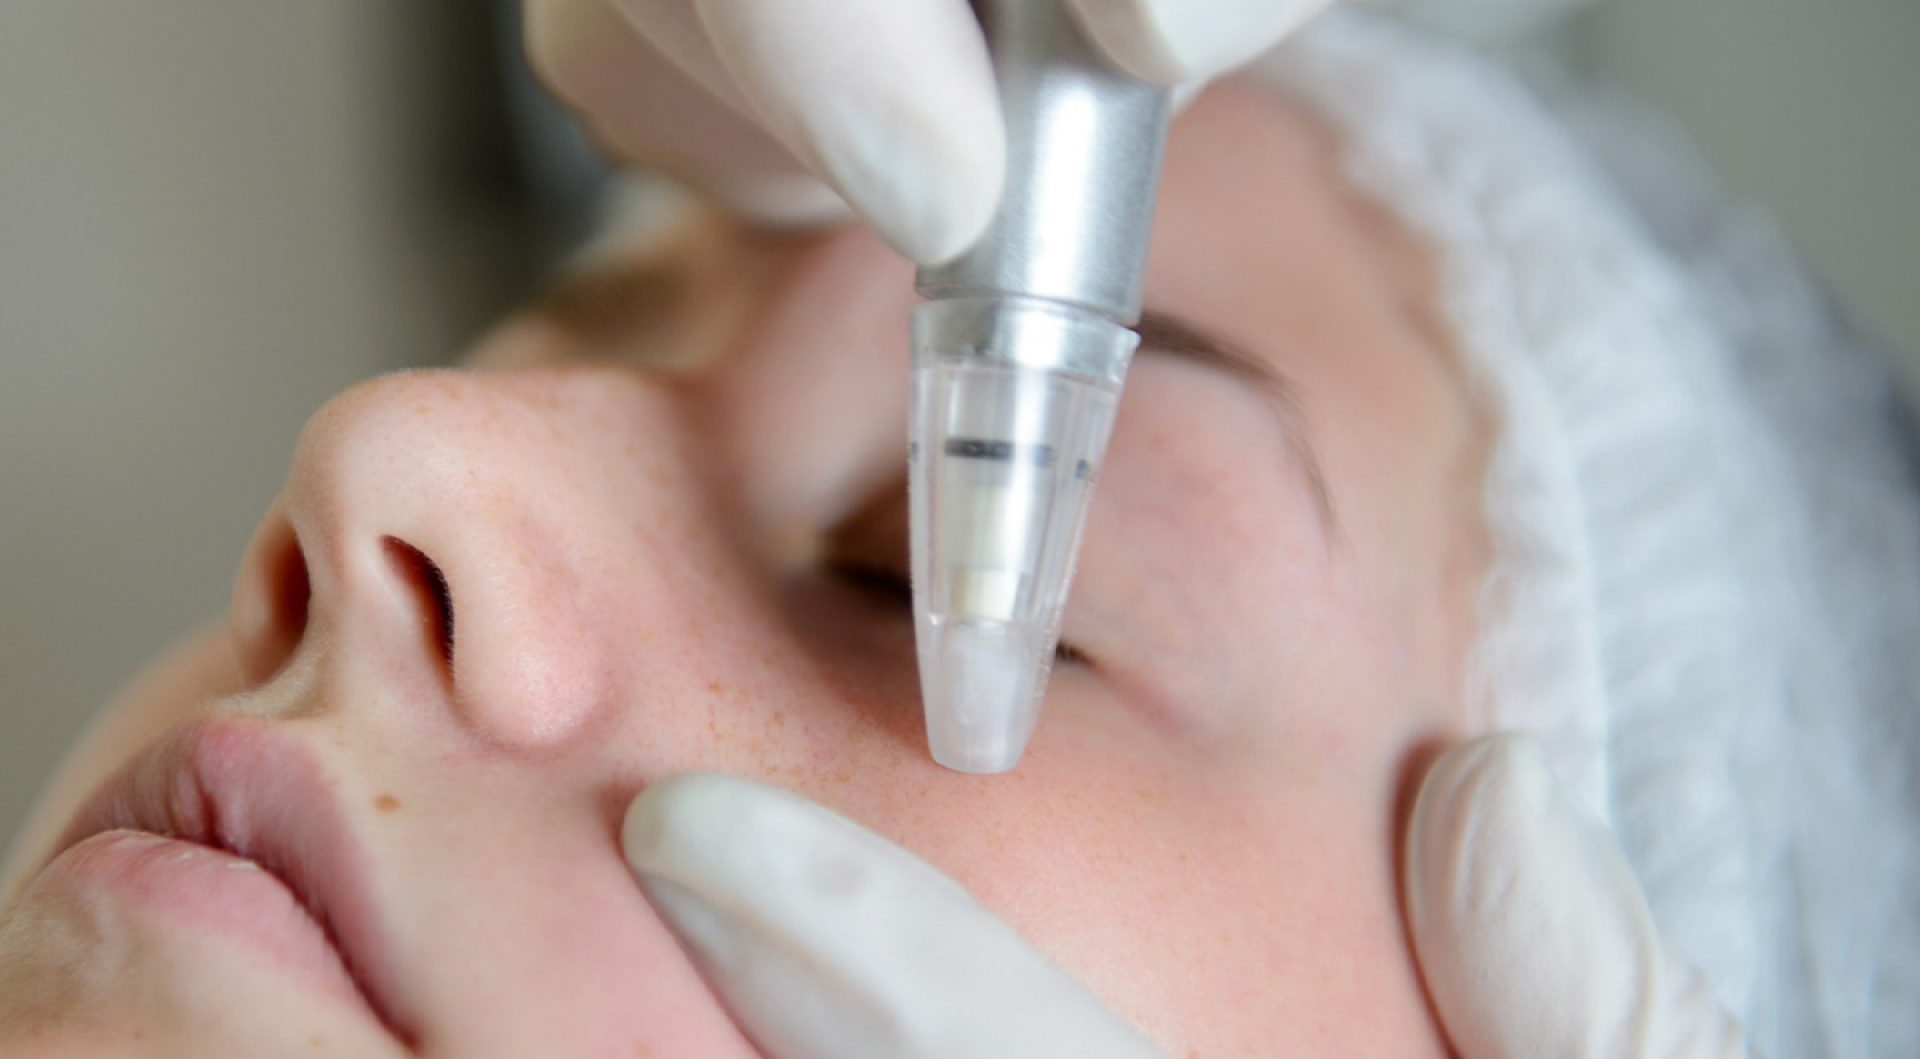 What Is Microdermabrasion?